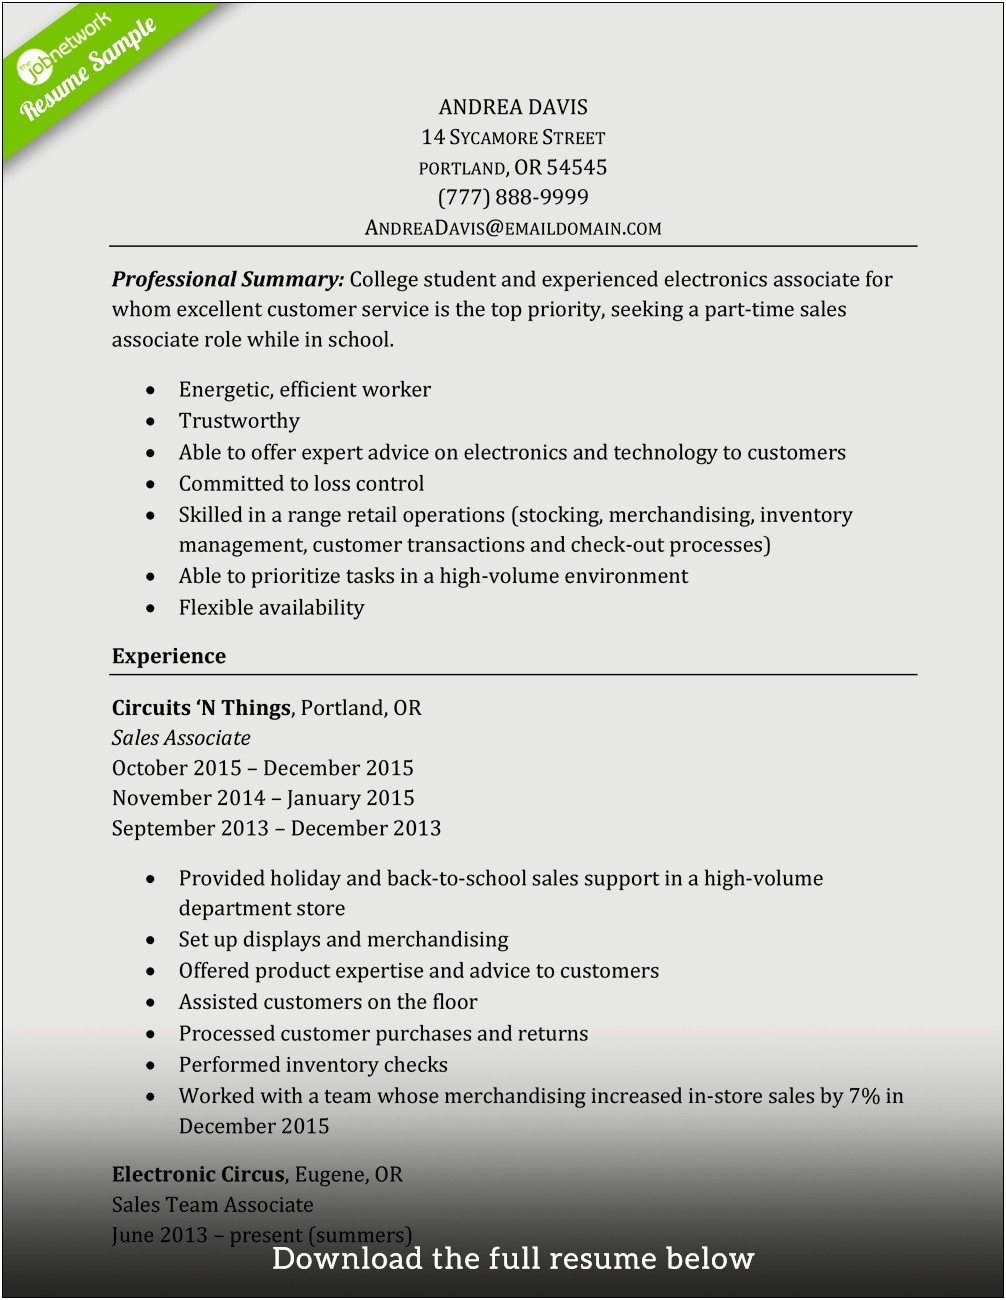 Professional Resume With Part Time Experience